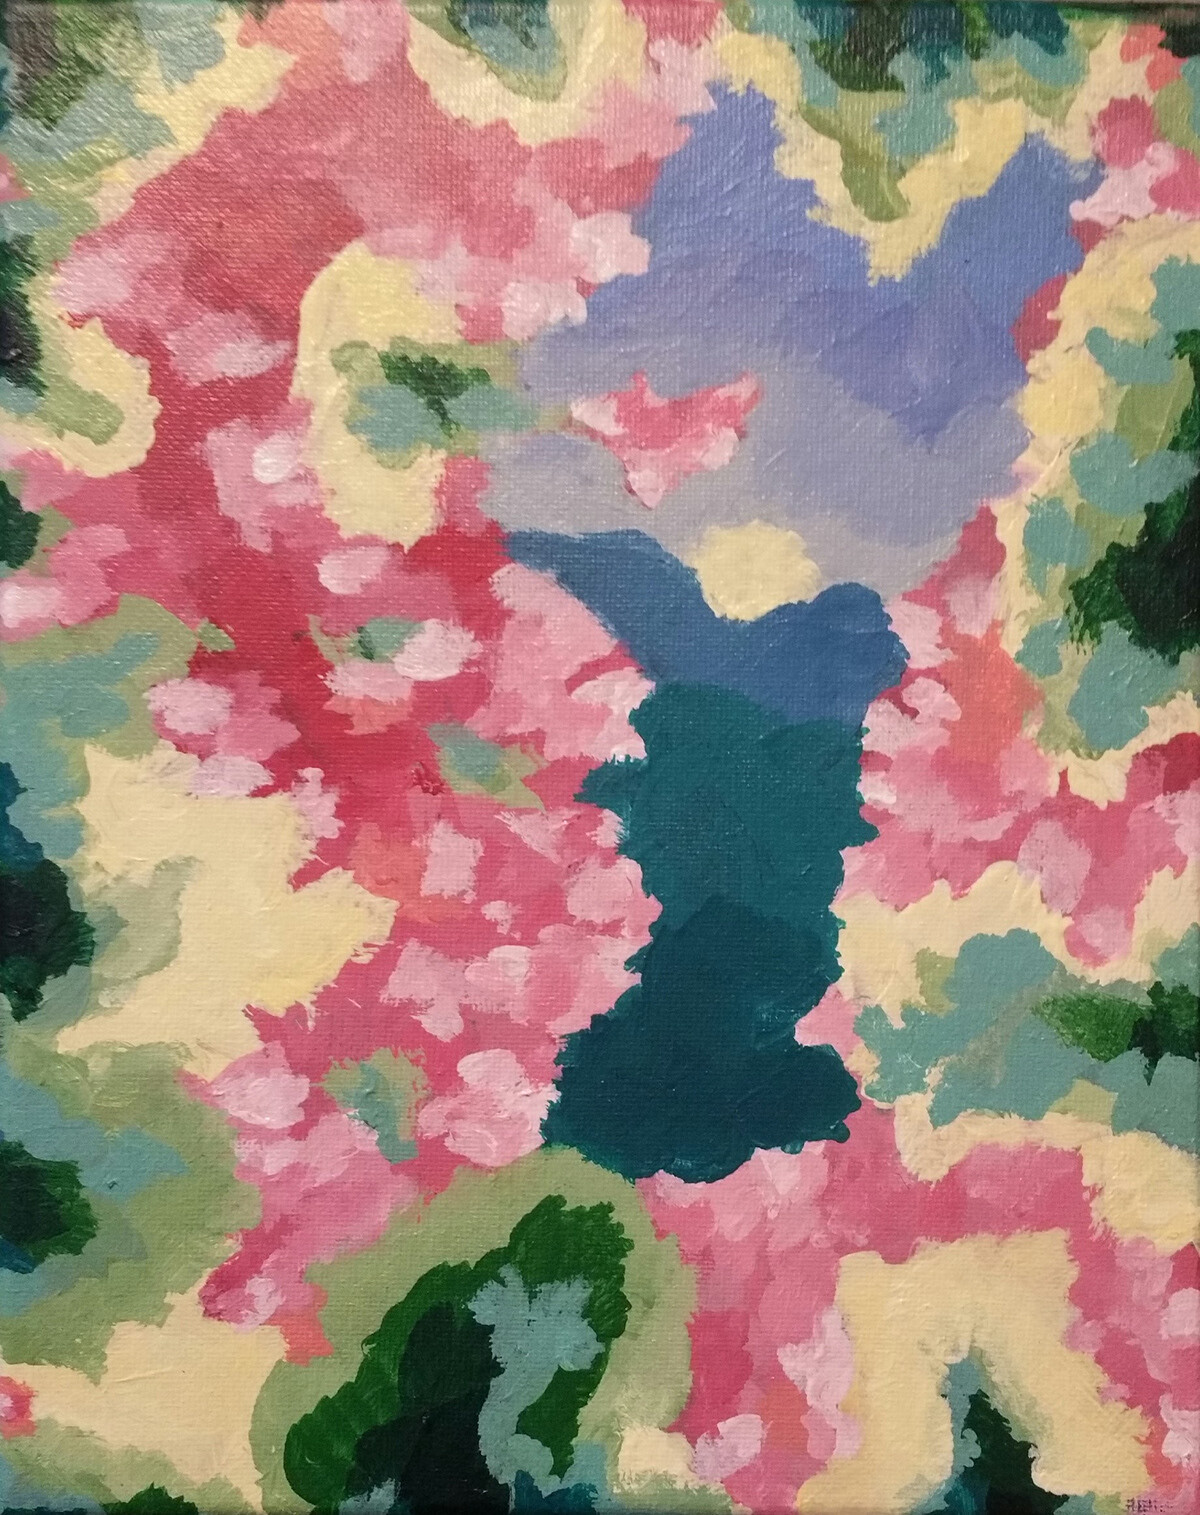 Mountain Blossoms, Acrylic on Canvas, 2017